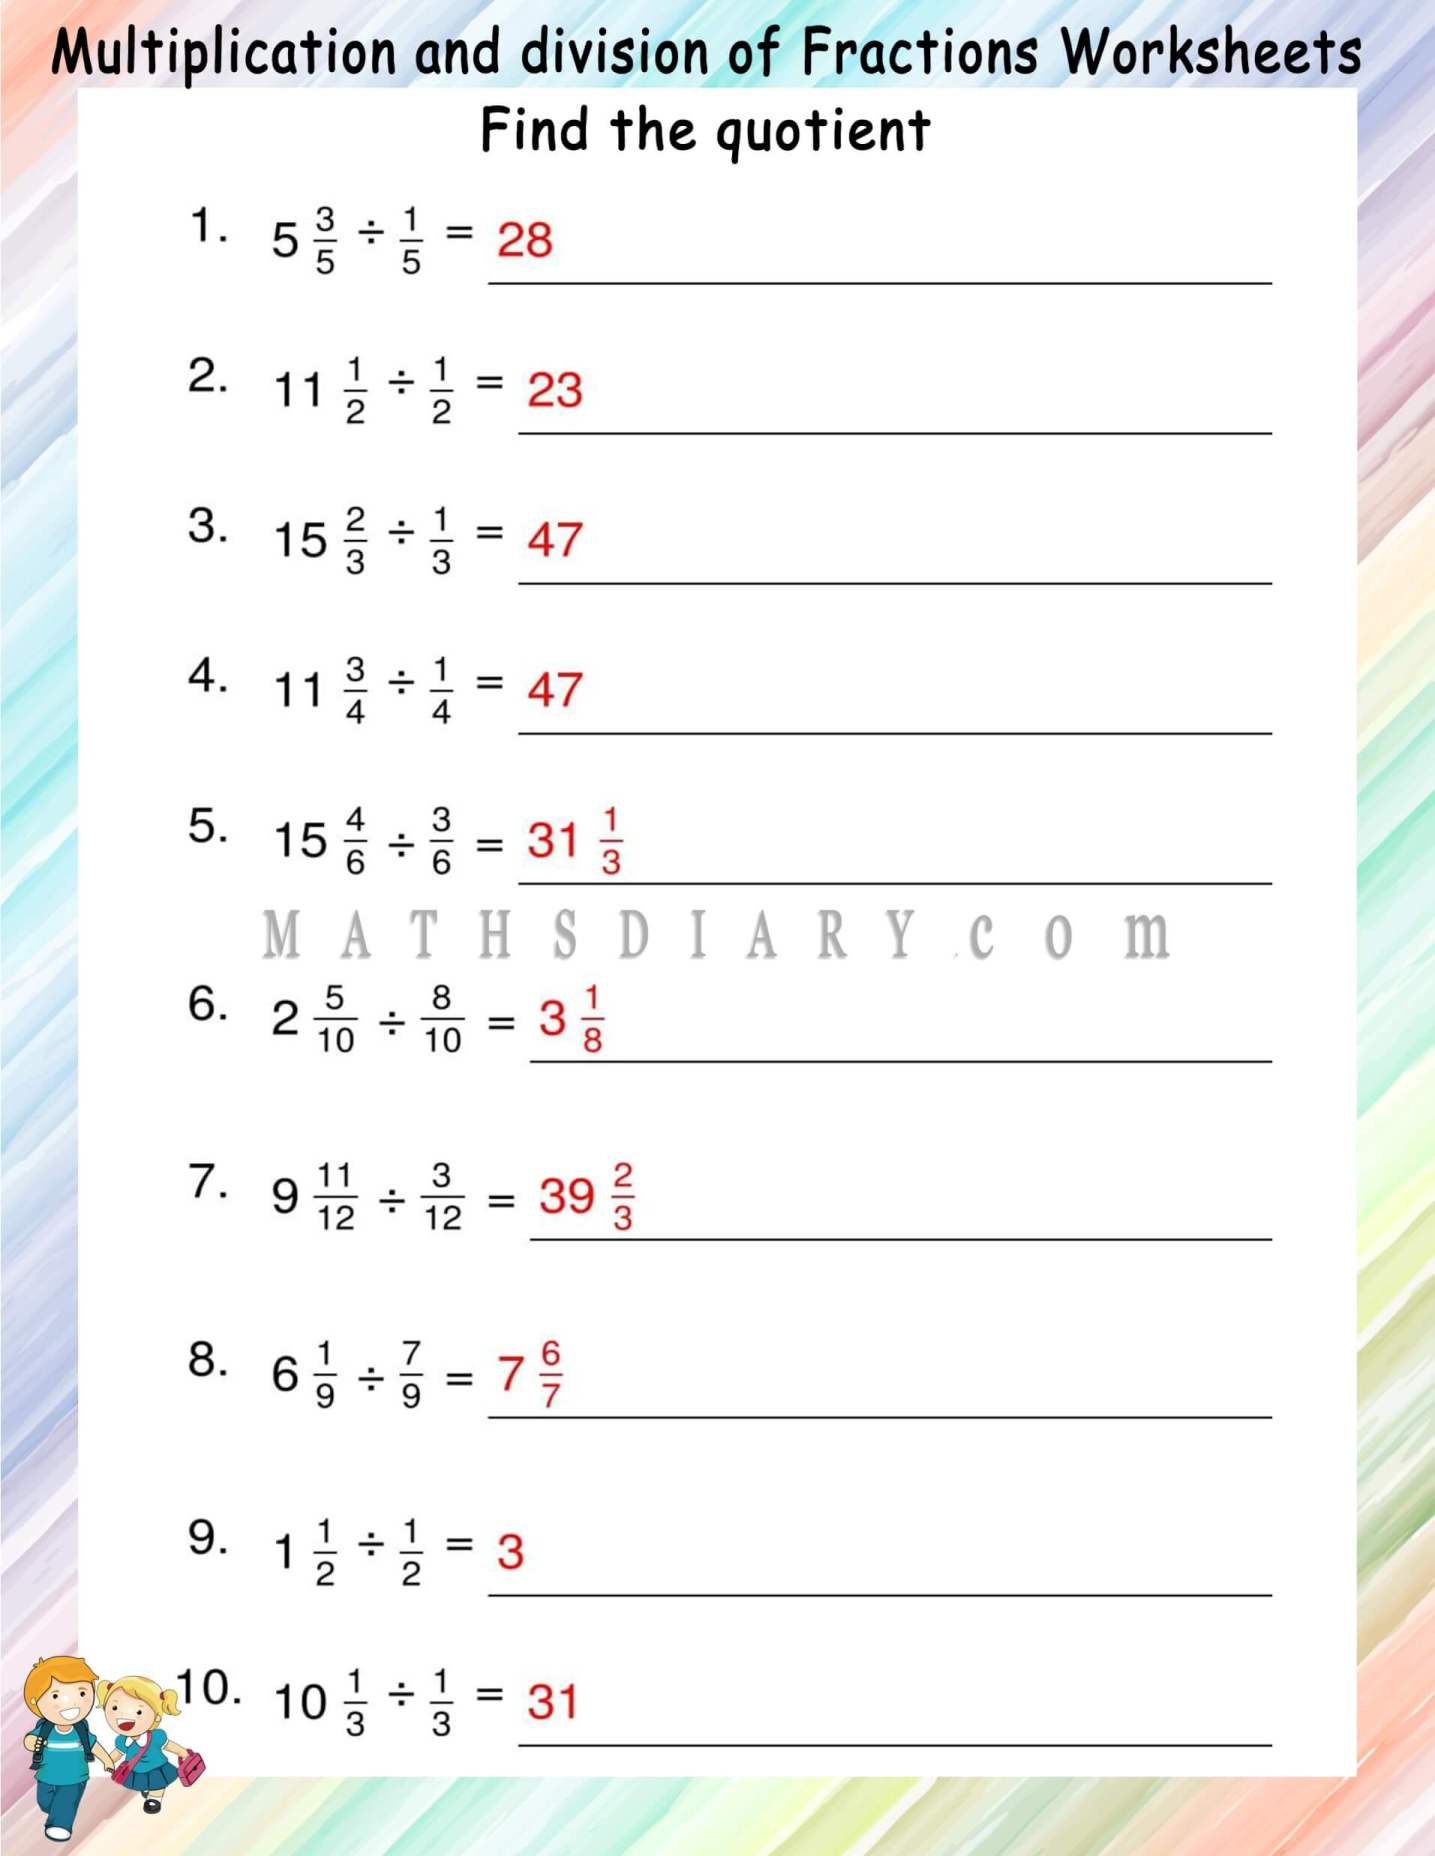 dividing-whole-number-by-fractions-worksheets-math-worksheets-mathsdiary